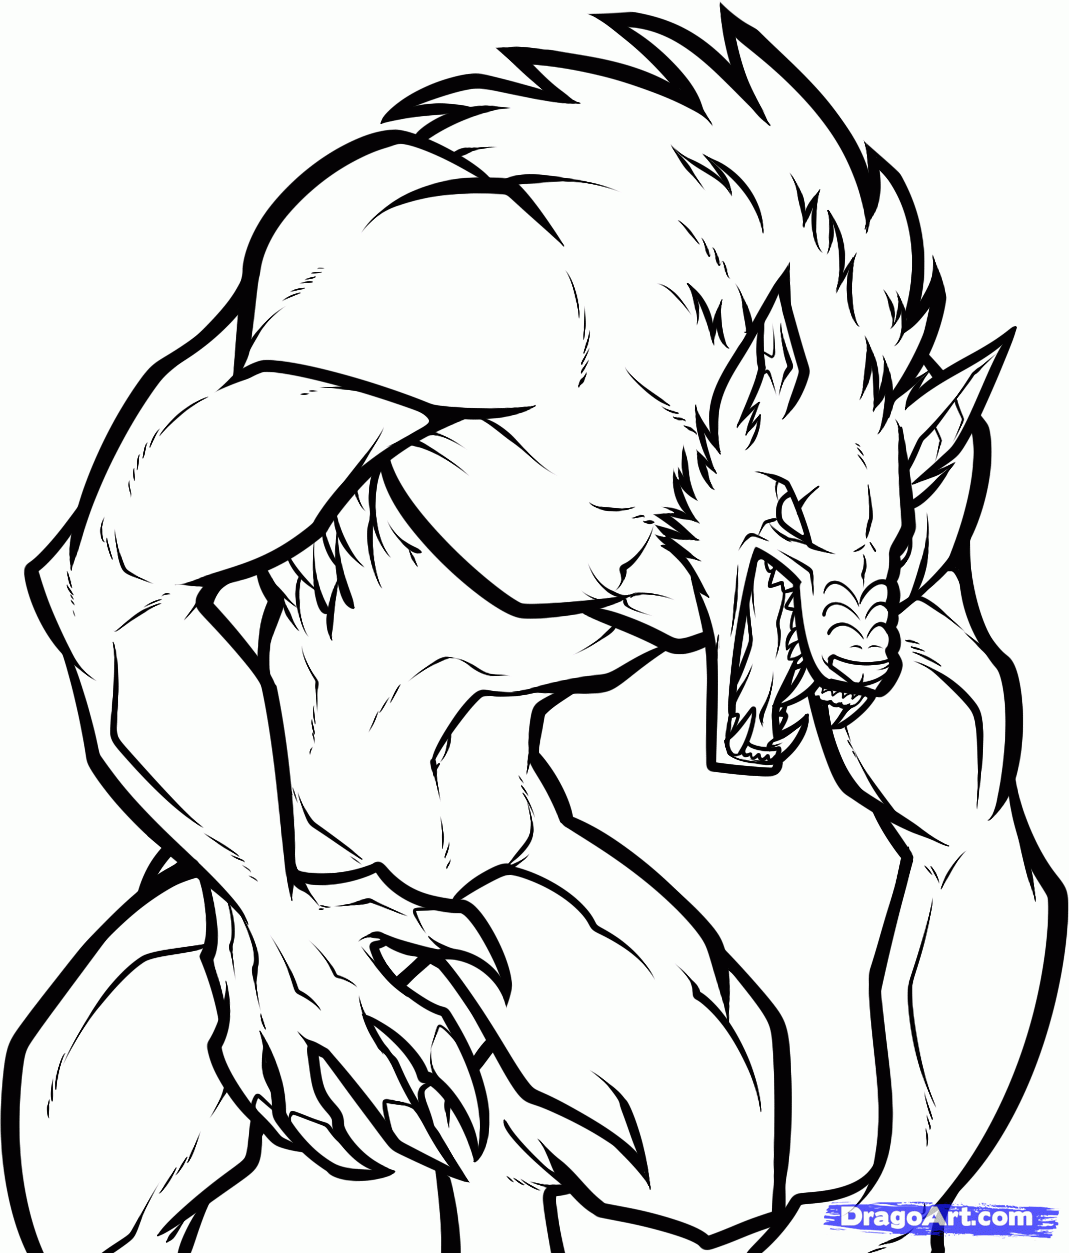 Werewolf Coloring Coloring Pages For Kids And For Adults Coloring Home